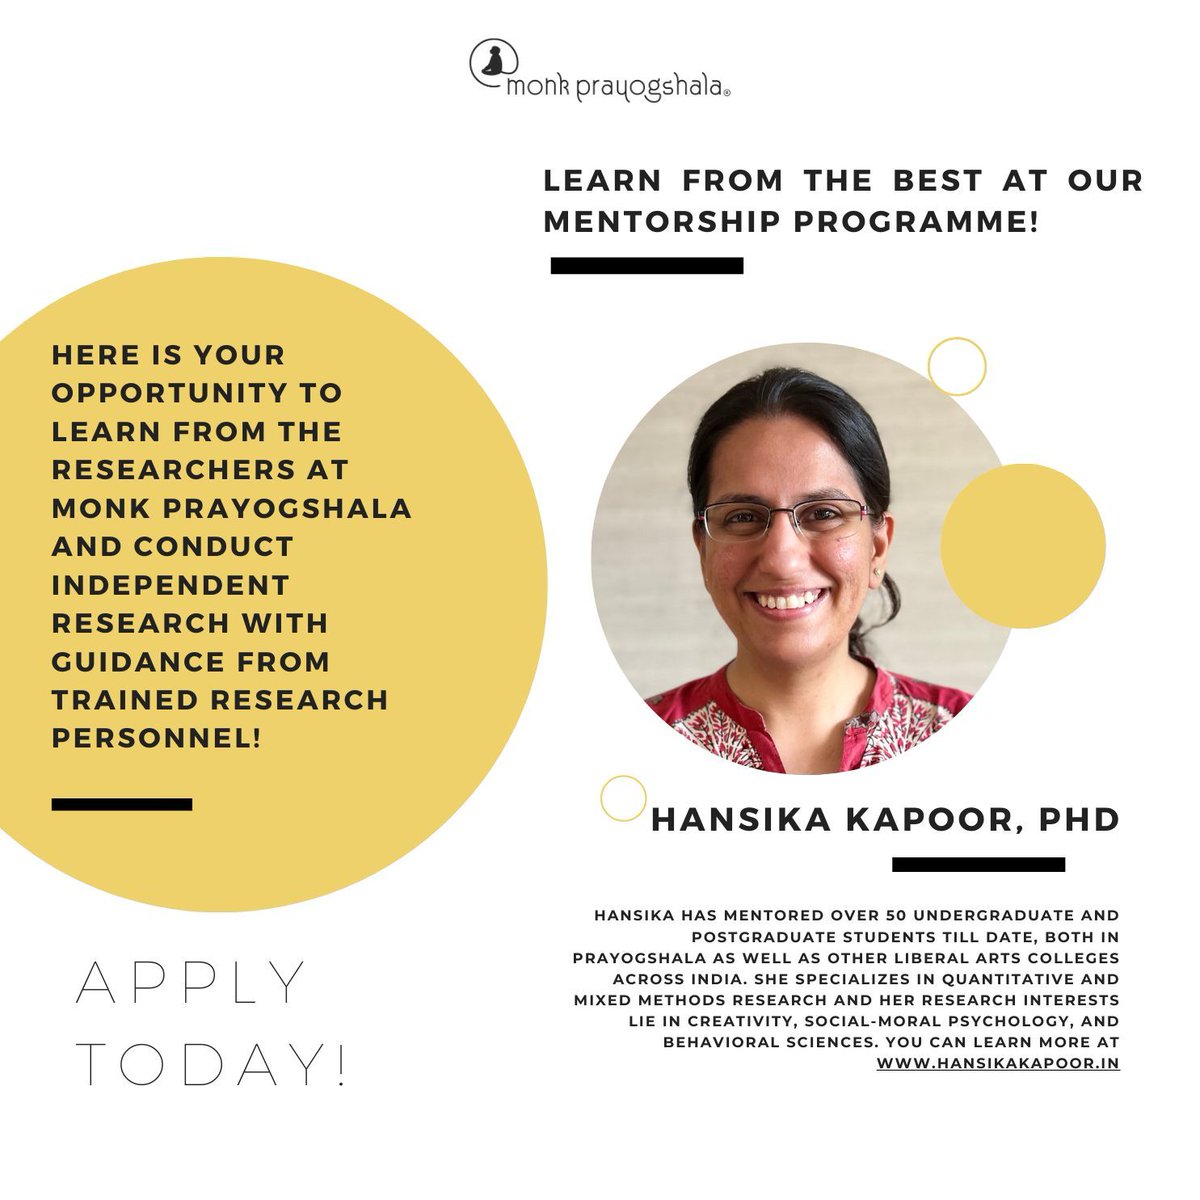 Meet the mentor! @hansika_kapoor Are you looking for assistance in the world of #socialsciences #research, and want guidance? Look no far. Our mentorship programme offers just that. Conduct independent research, with guidance from our mentors! buff.ly/3lDVsmB